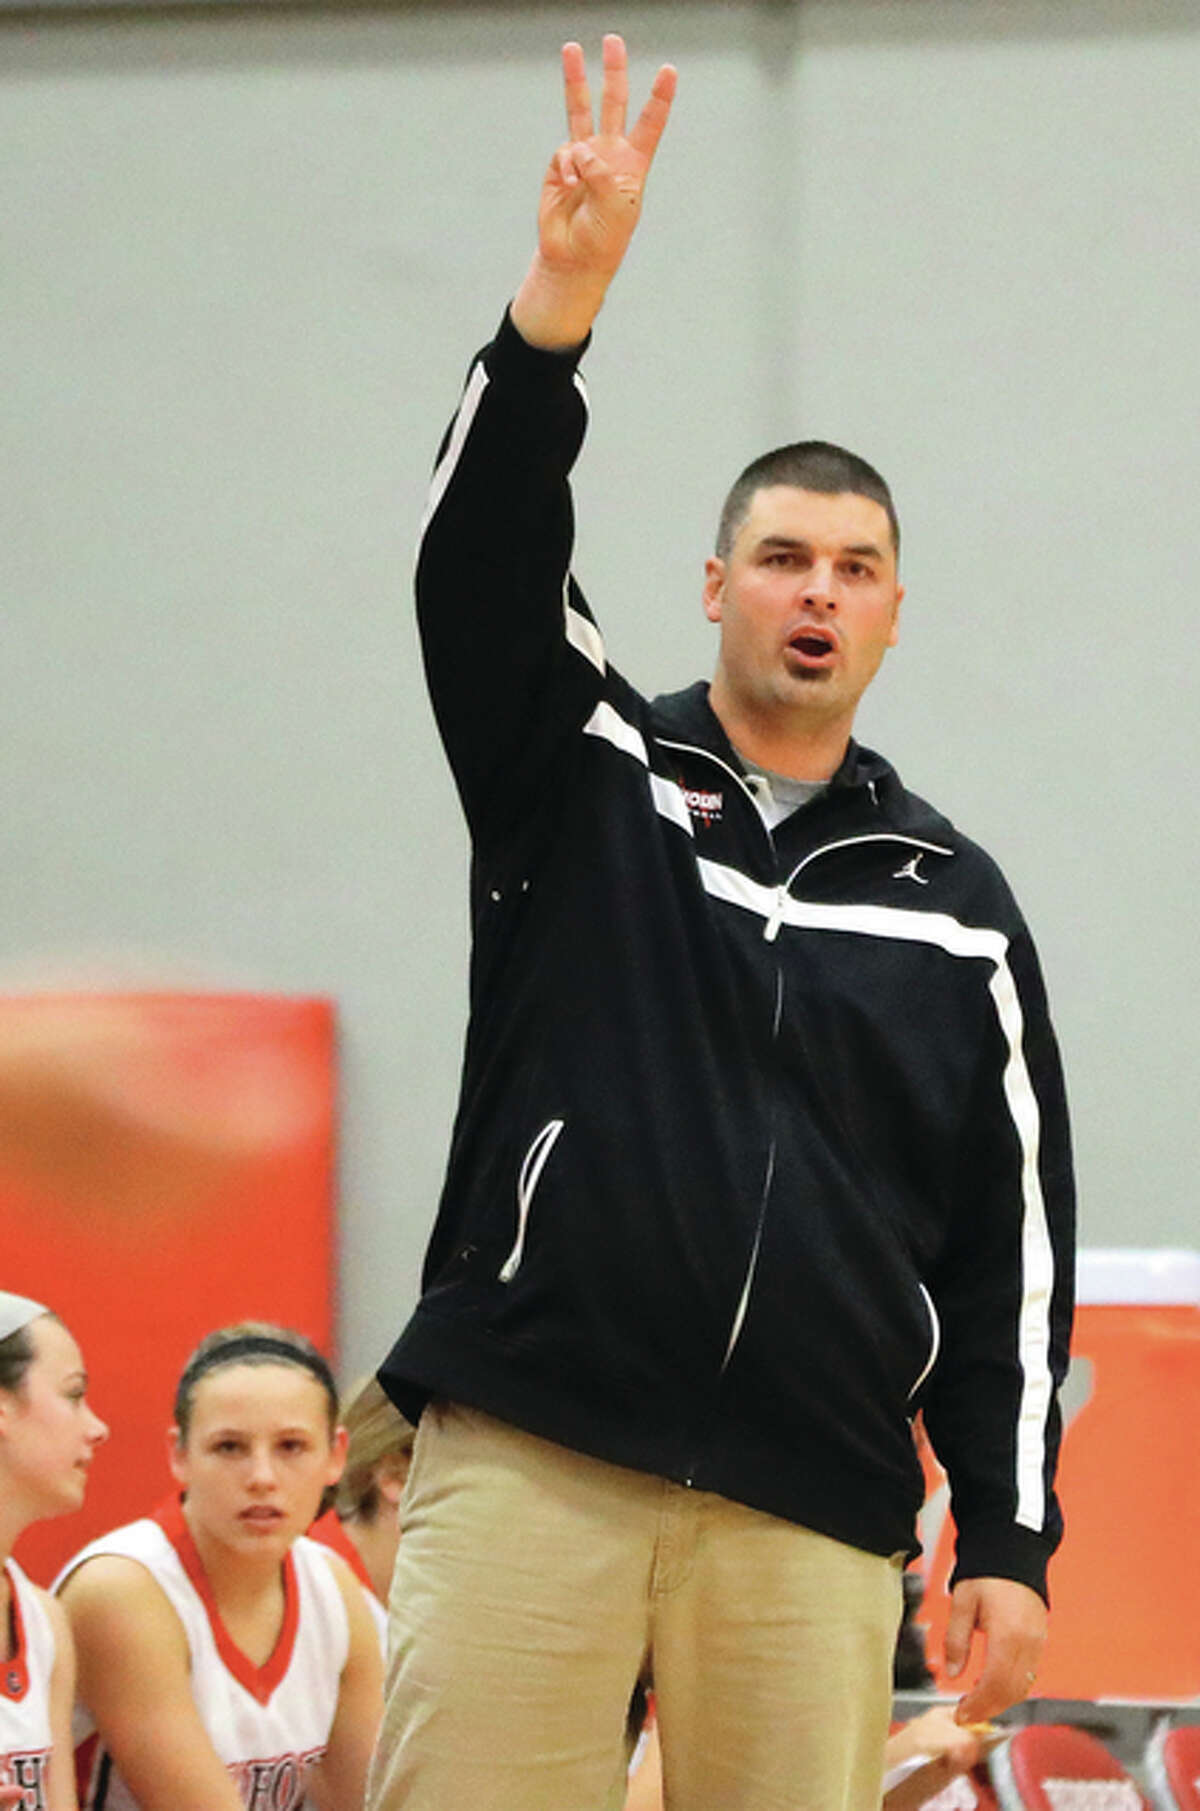 Coach Aaron Baalman’s Calhoun Warriors earned their third straight trip to the Class 1A girls basketball state finals Monday night with a victory at the Salem Super-Sectional.